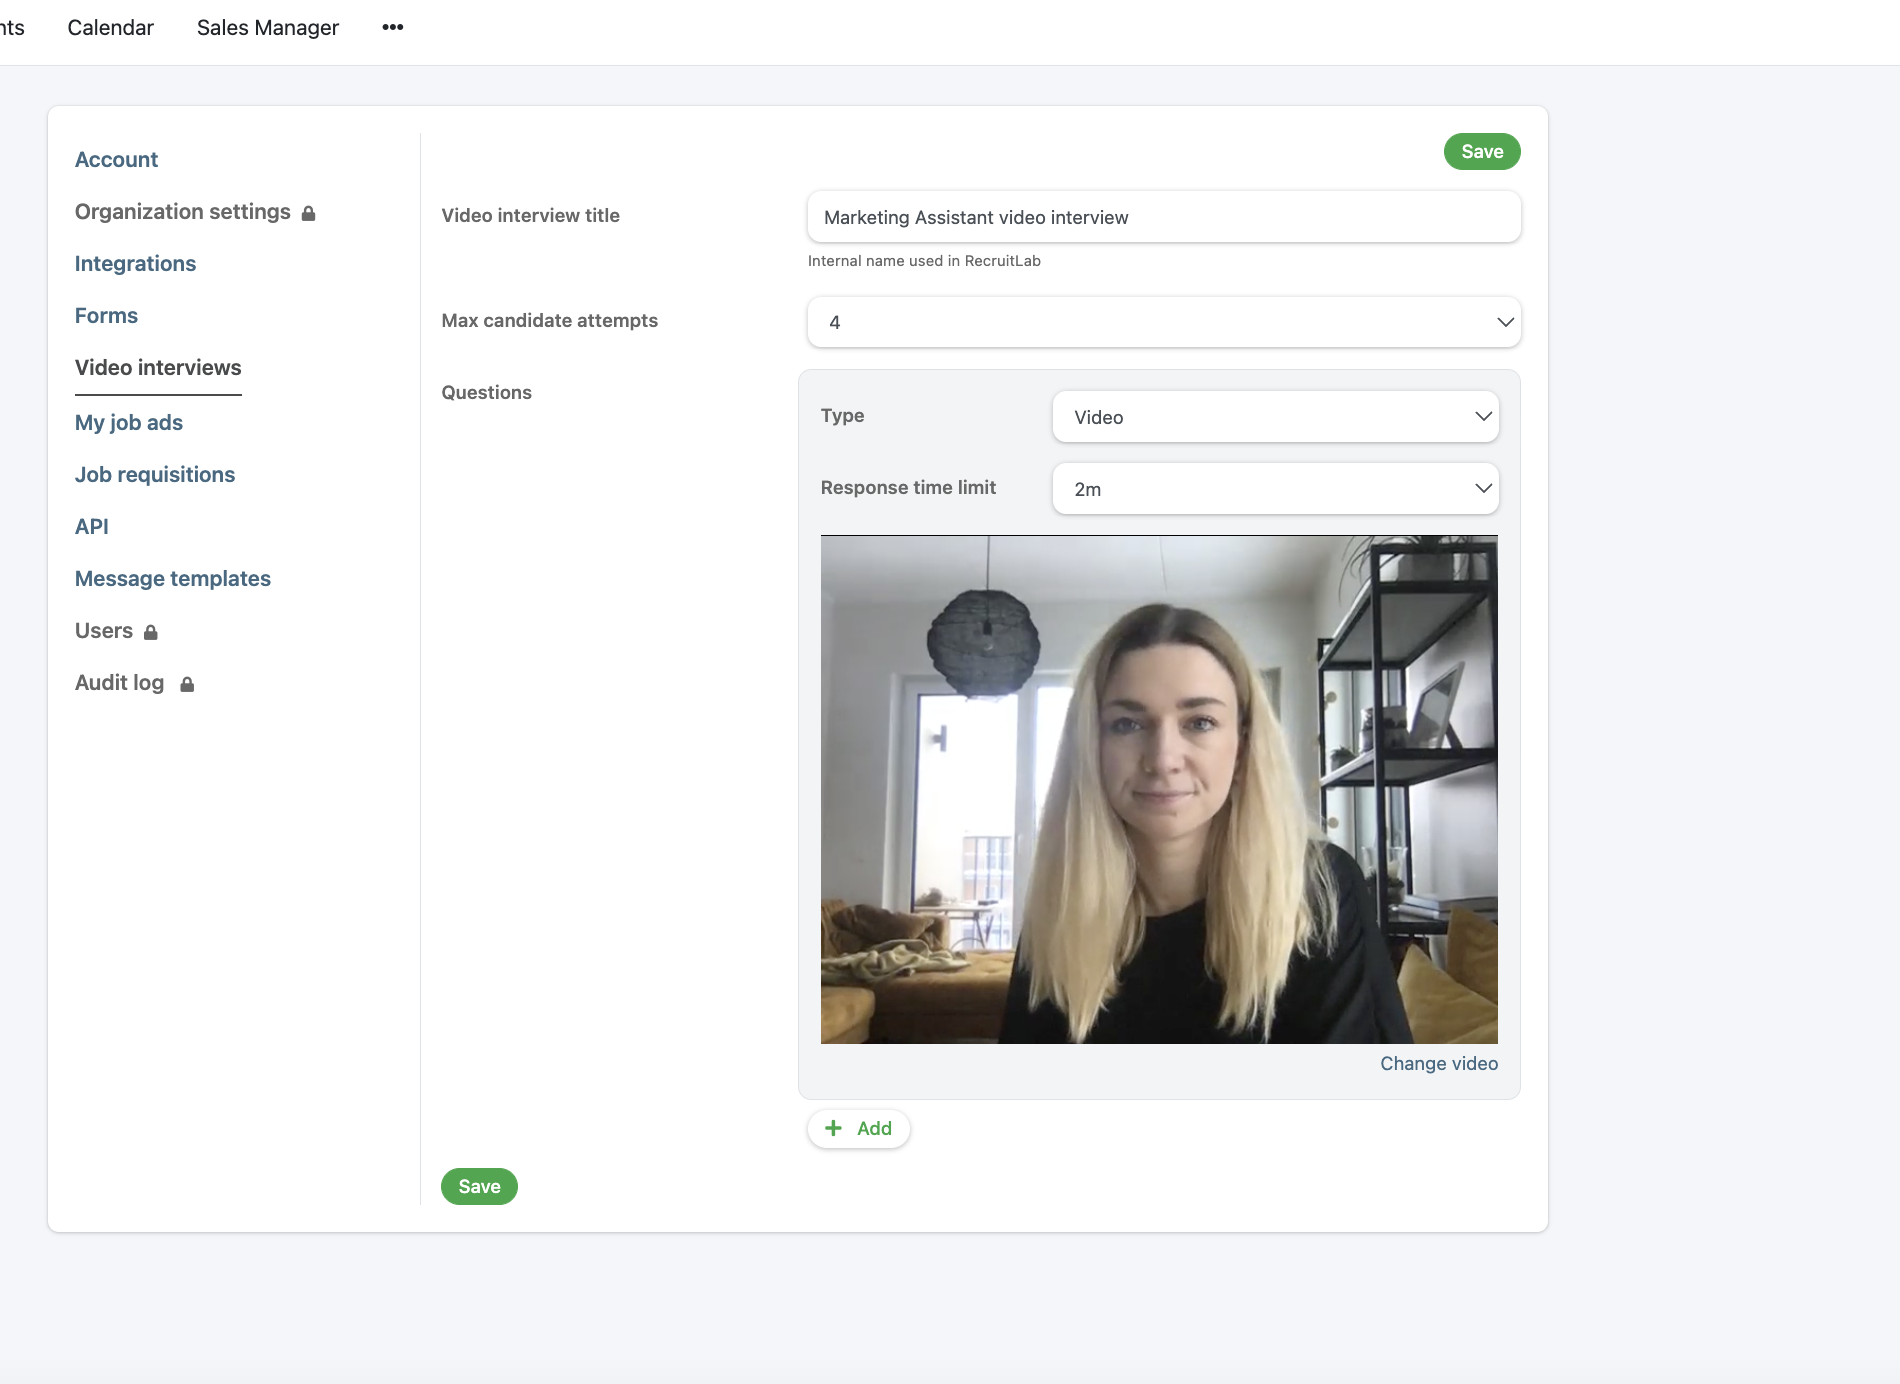 Video interview tools for both live and asyncronous interviews available. Use automated actions and email templates to schedule interviews with easel